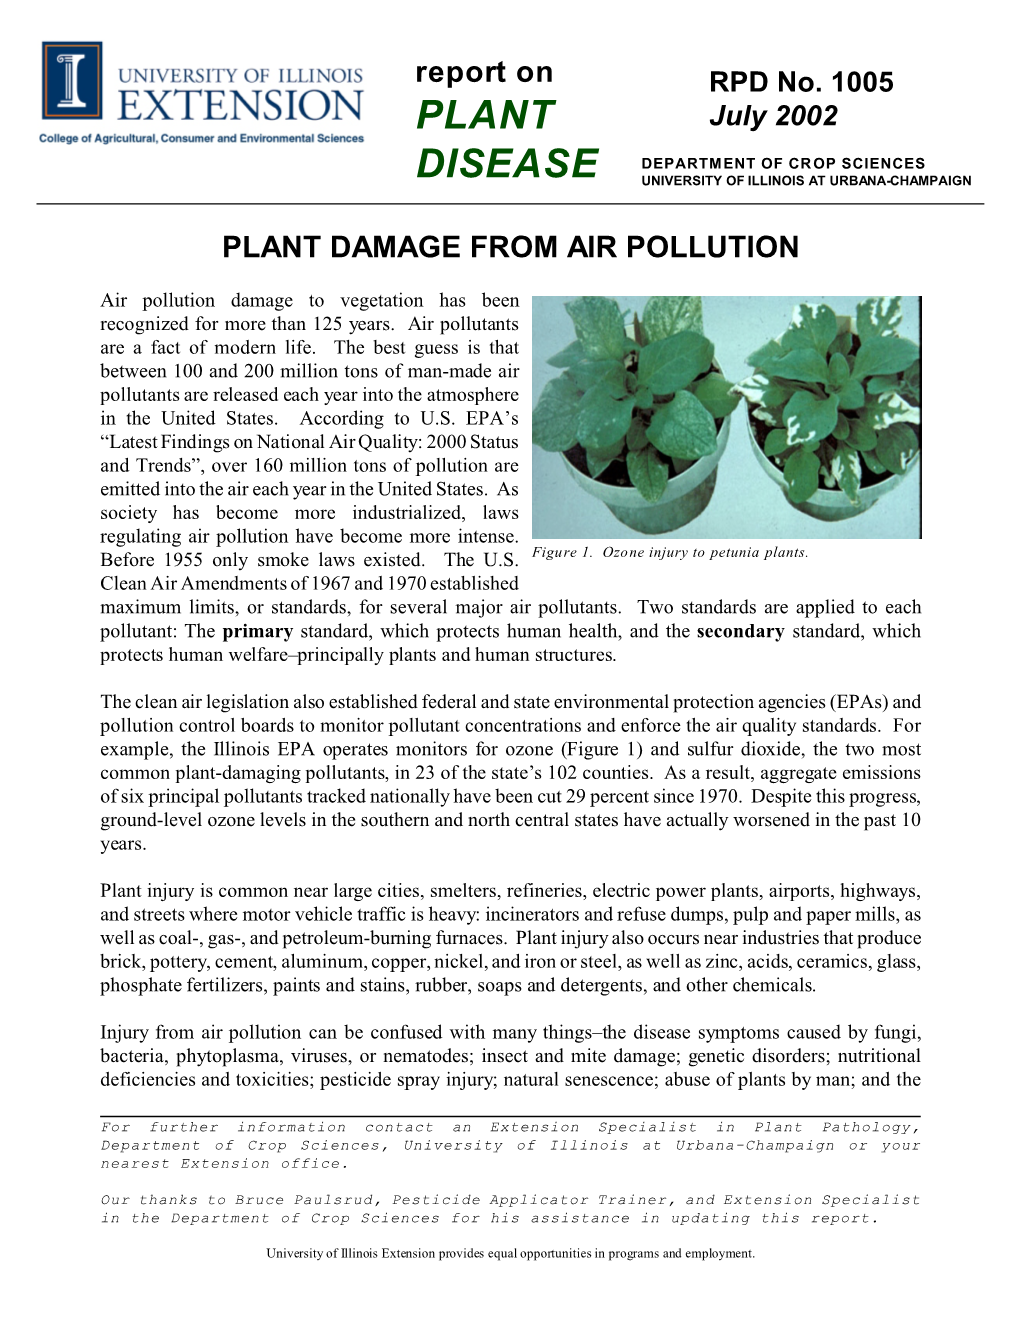 Plant Damage from Air Pollution